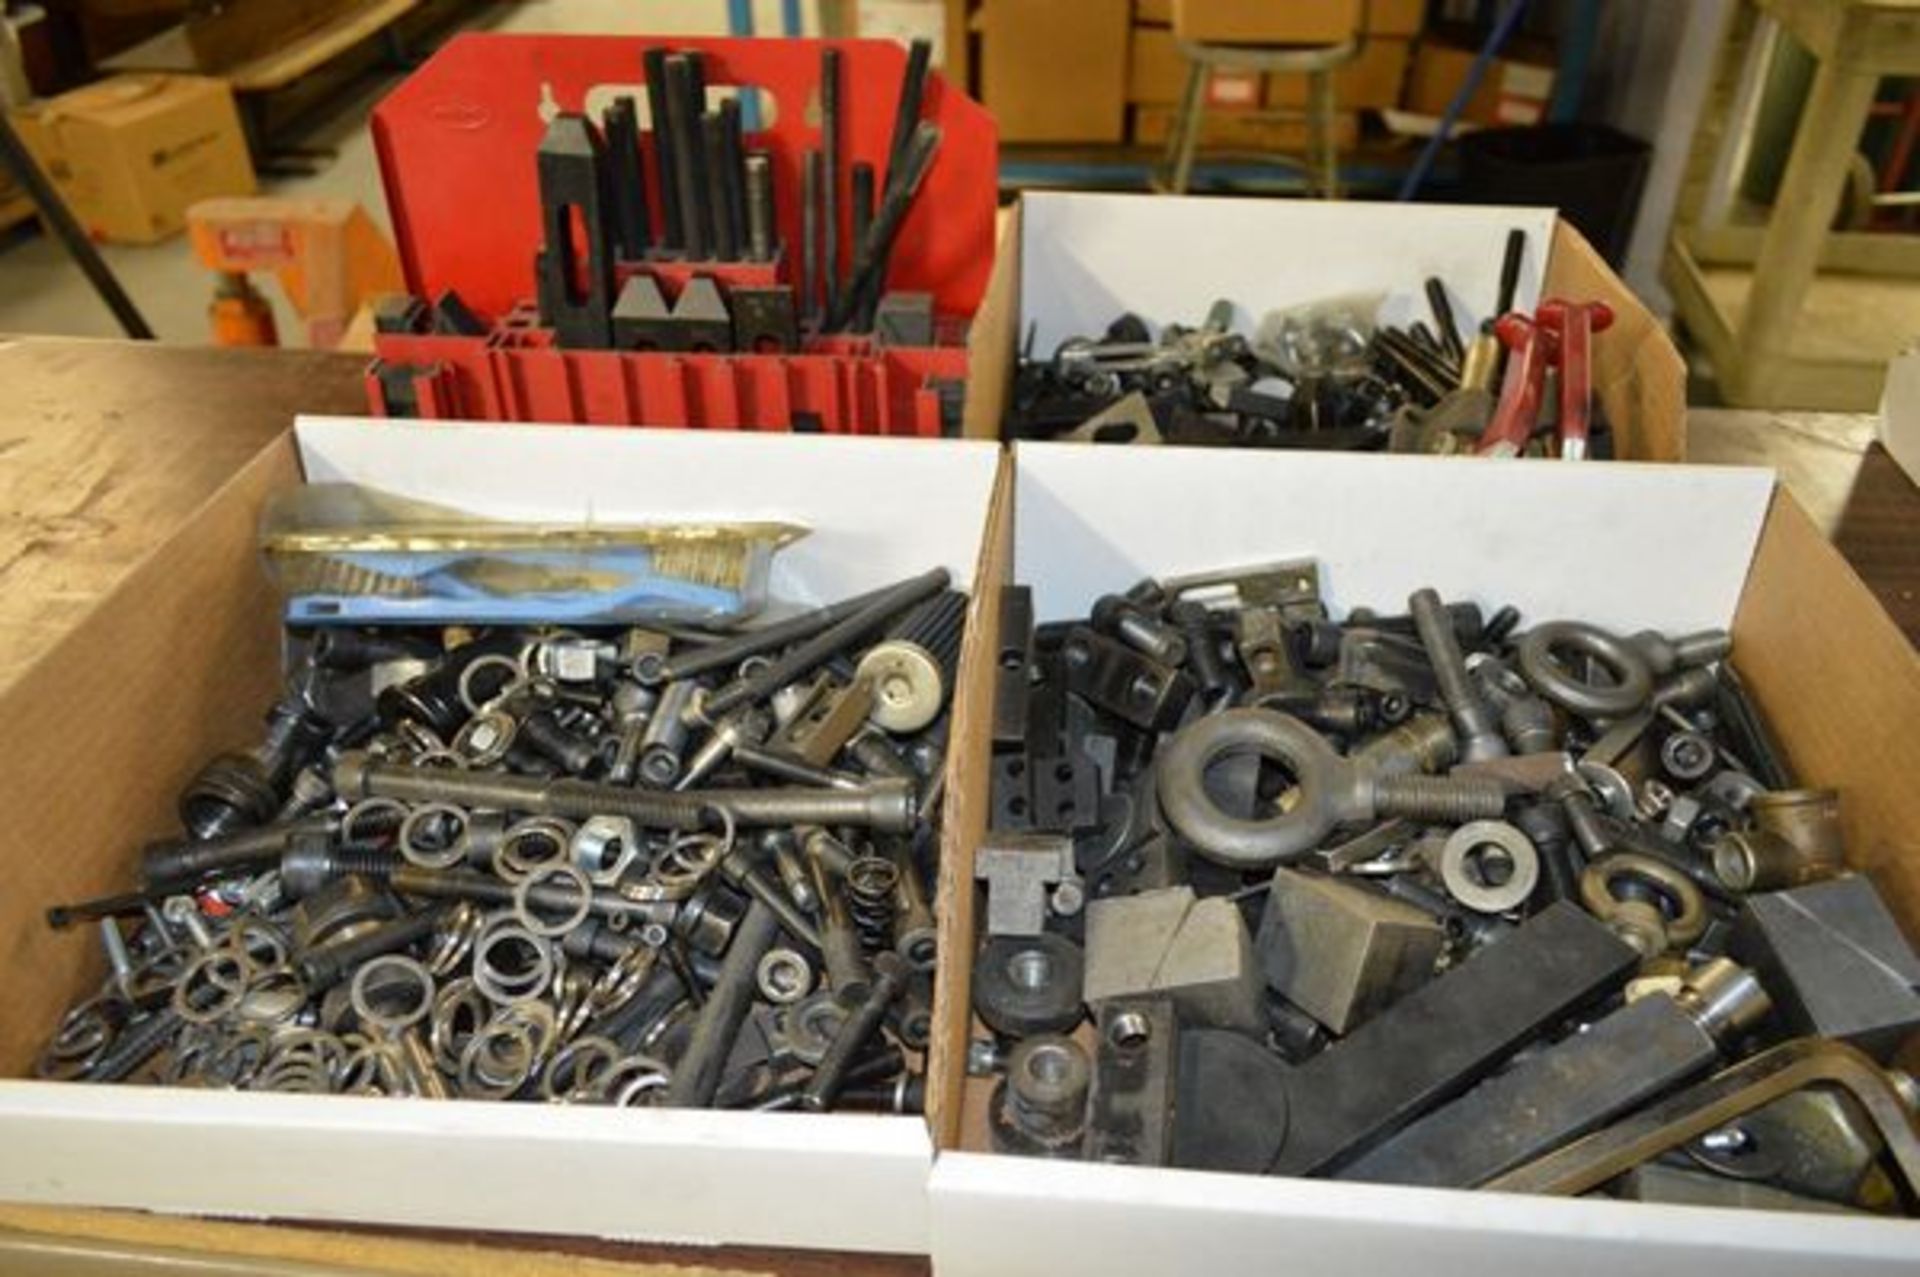 T-Slot Settup Clamps, Hex Bolts and Boxes of Various Nuts and Bolts. - Image 6 of 6